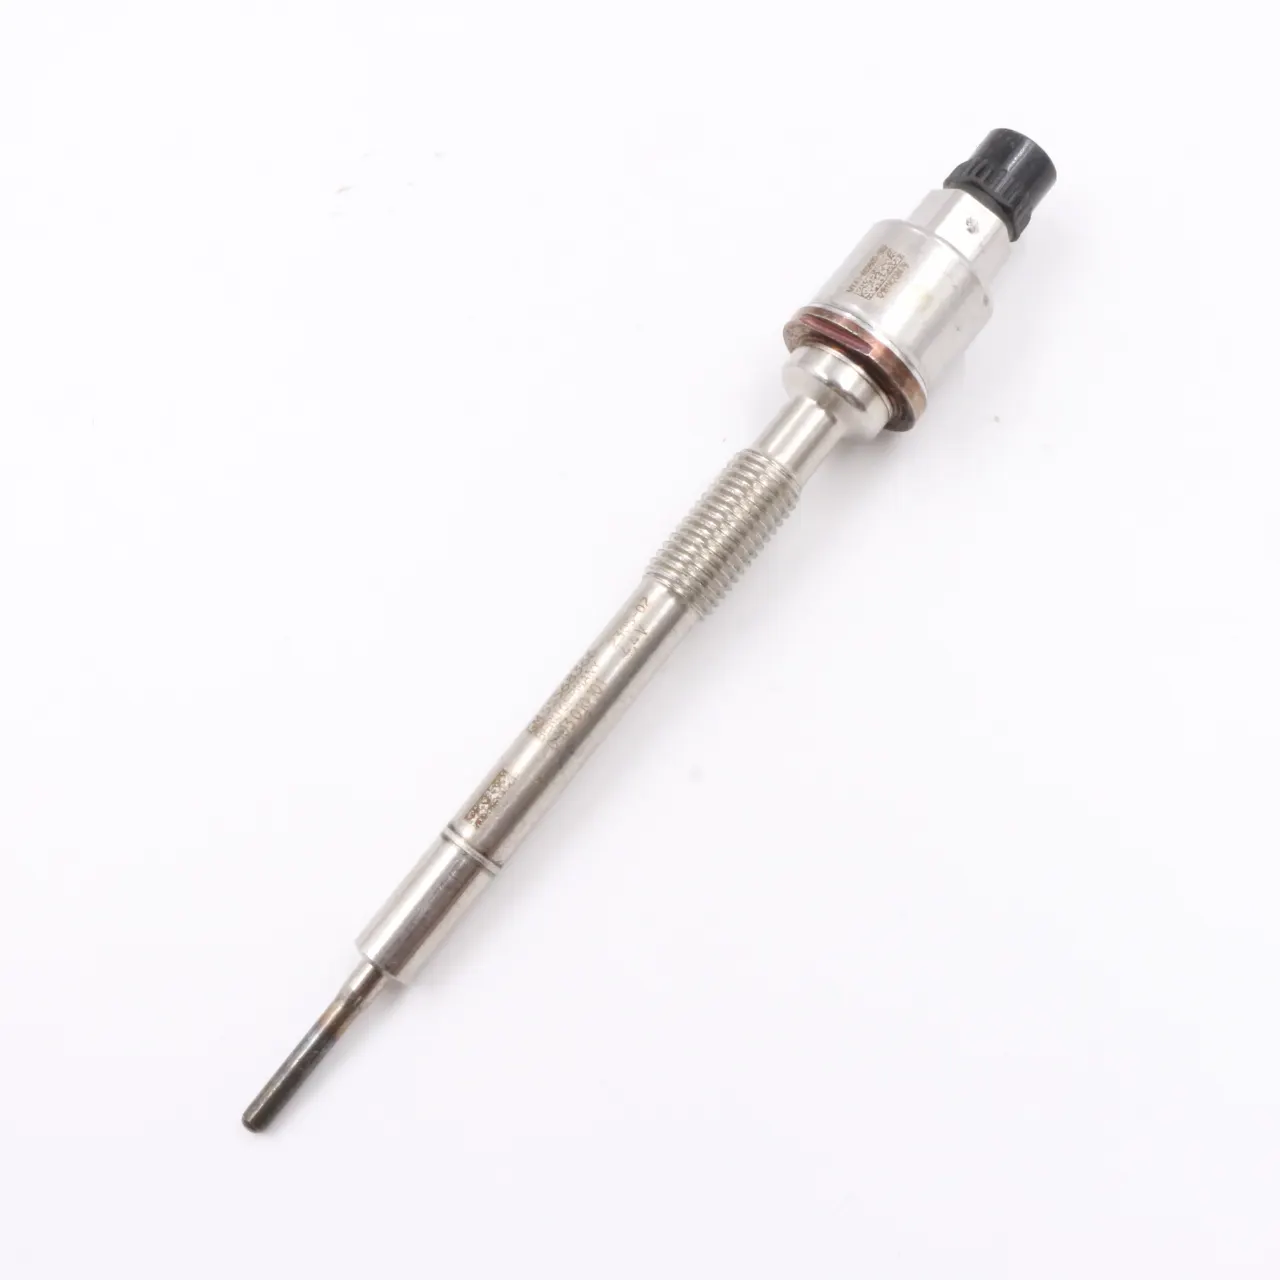 100006538 55568366 New High Quality Glow Plug For GM-C B-uick C-hevrolet car accessories